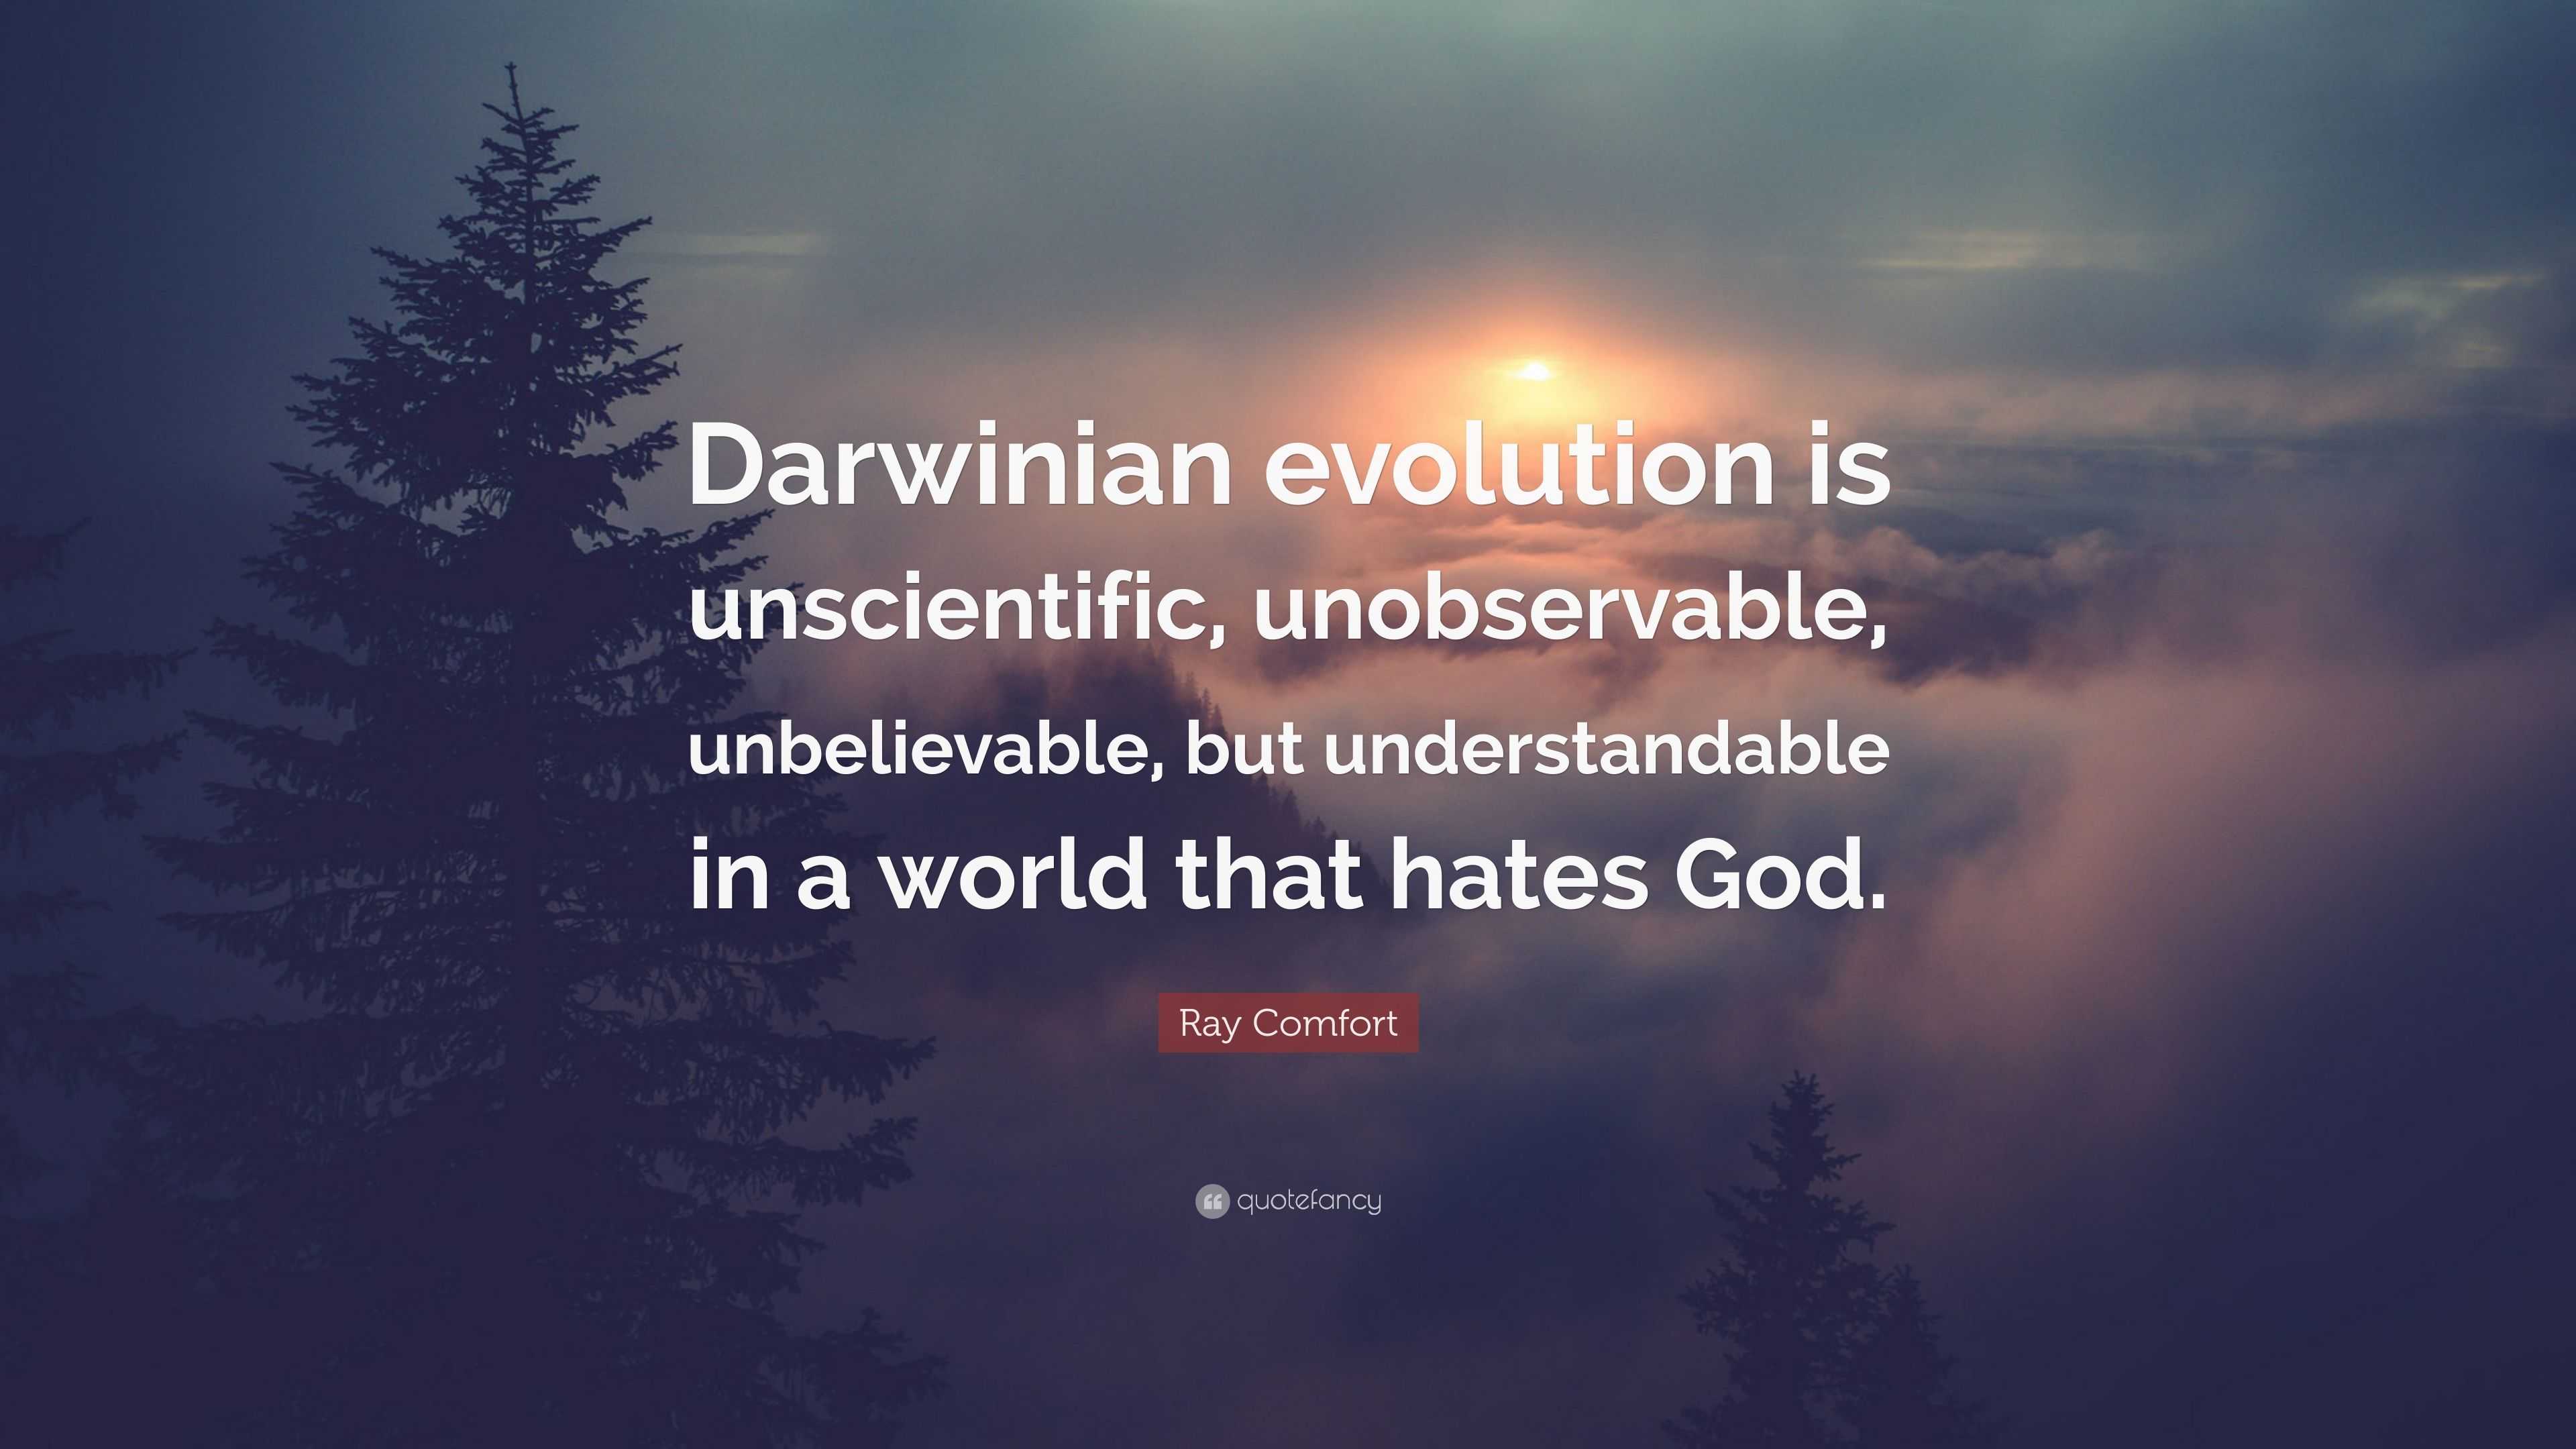 Ray Comfort quote: Evolution is unobservable. It's based on blind faith in  a